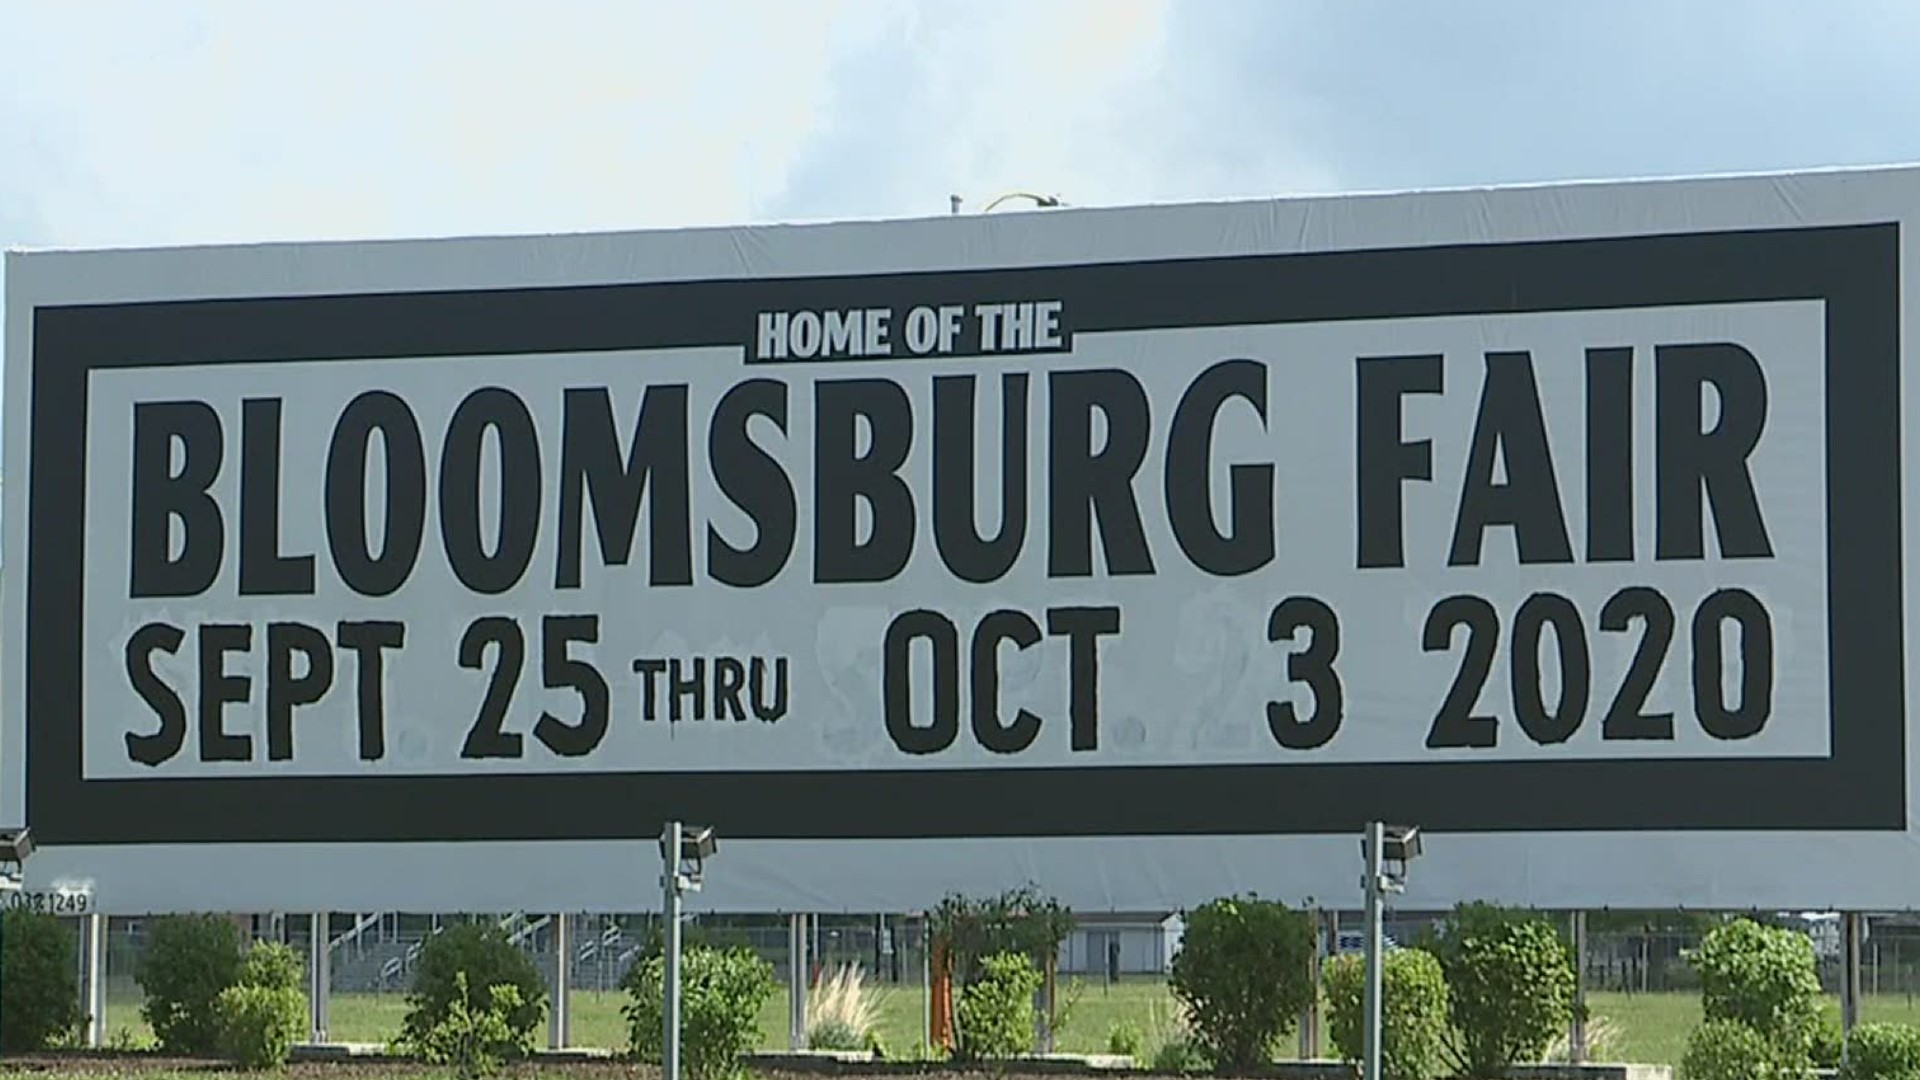 Directors of the Bloomsburg Fair say it won't be as large as usual, but preparations are still underway.